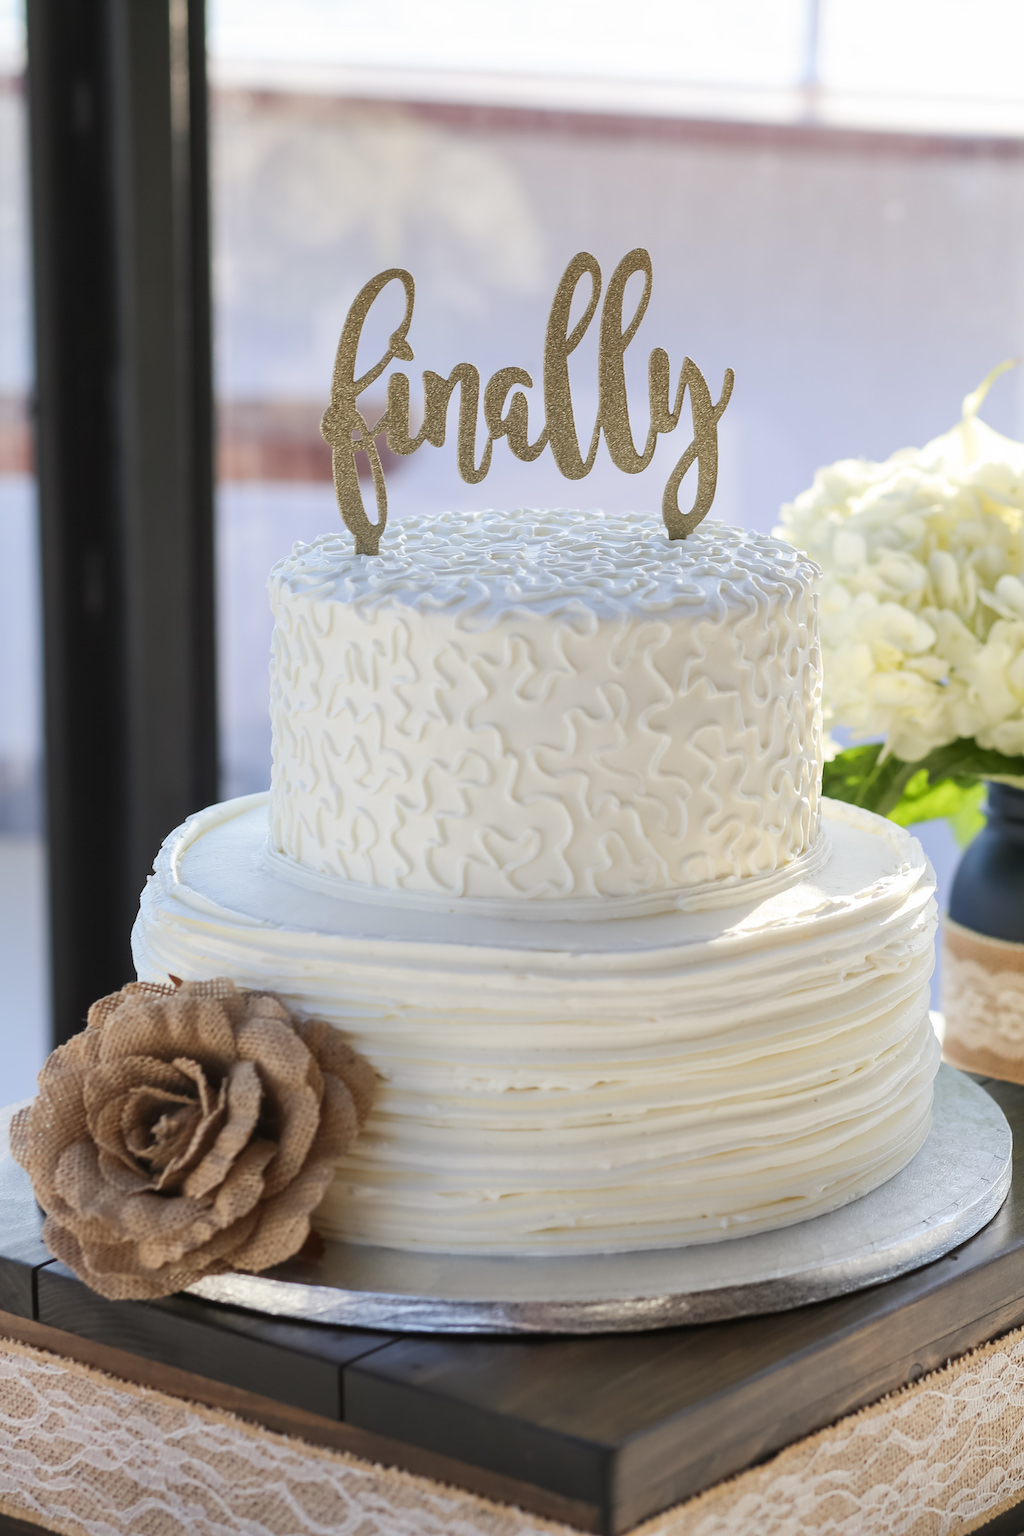 Two Tiered Round White Wedding Cake with Gold Fabric Rose and Gold Glitter Laser Cut Cake Topper | Tampa Bay Unique Waterfront Nautical Wedding Venue Yacht Starship | Tampa Bay Wedding Photographer Lifelong Photography Studios